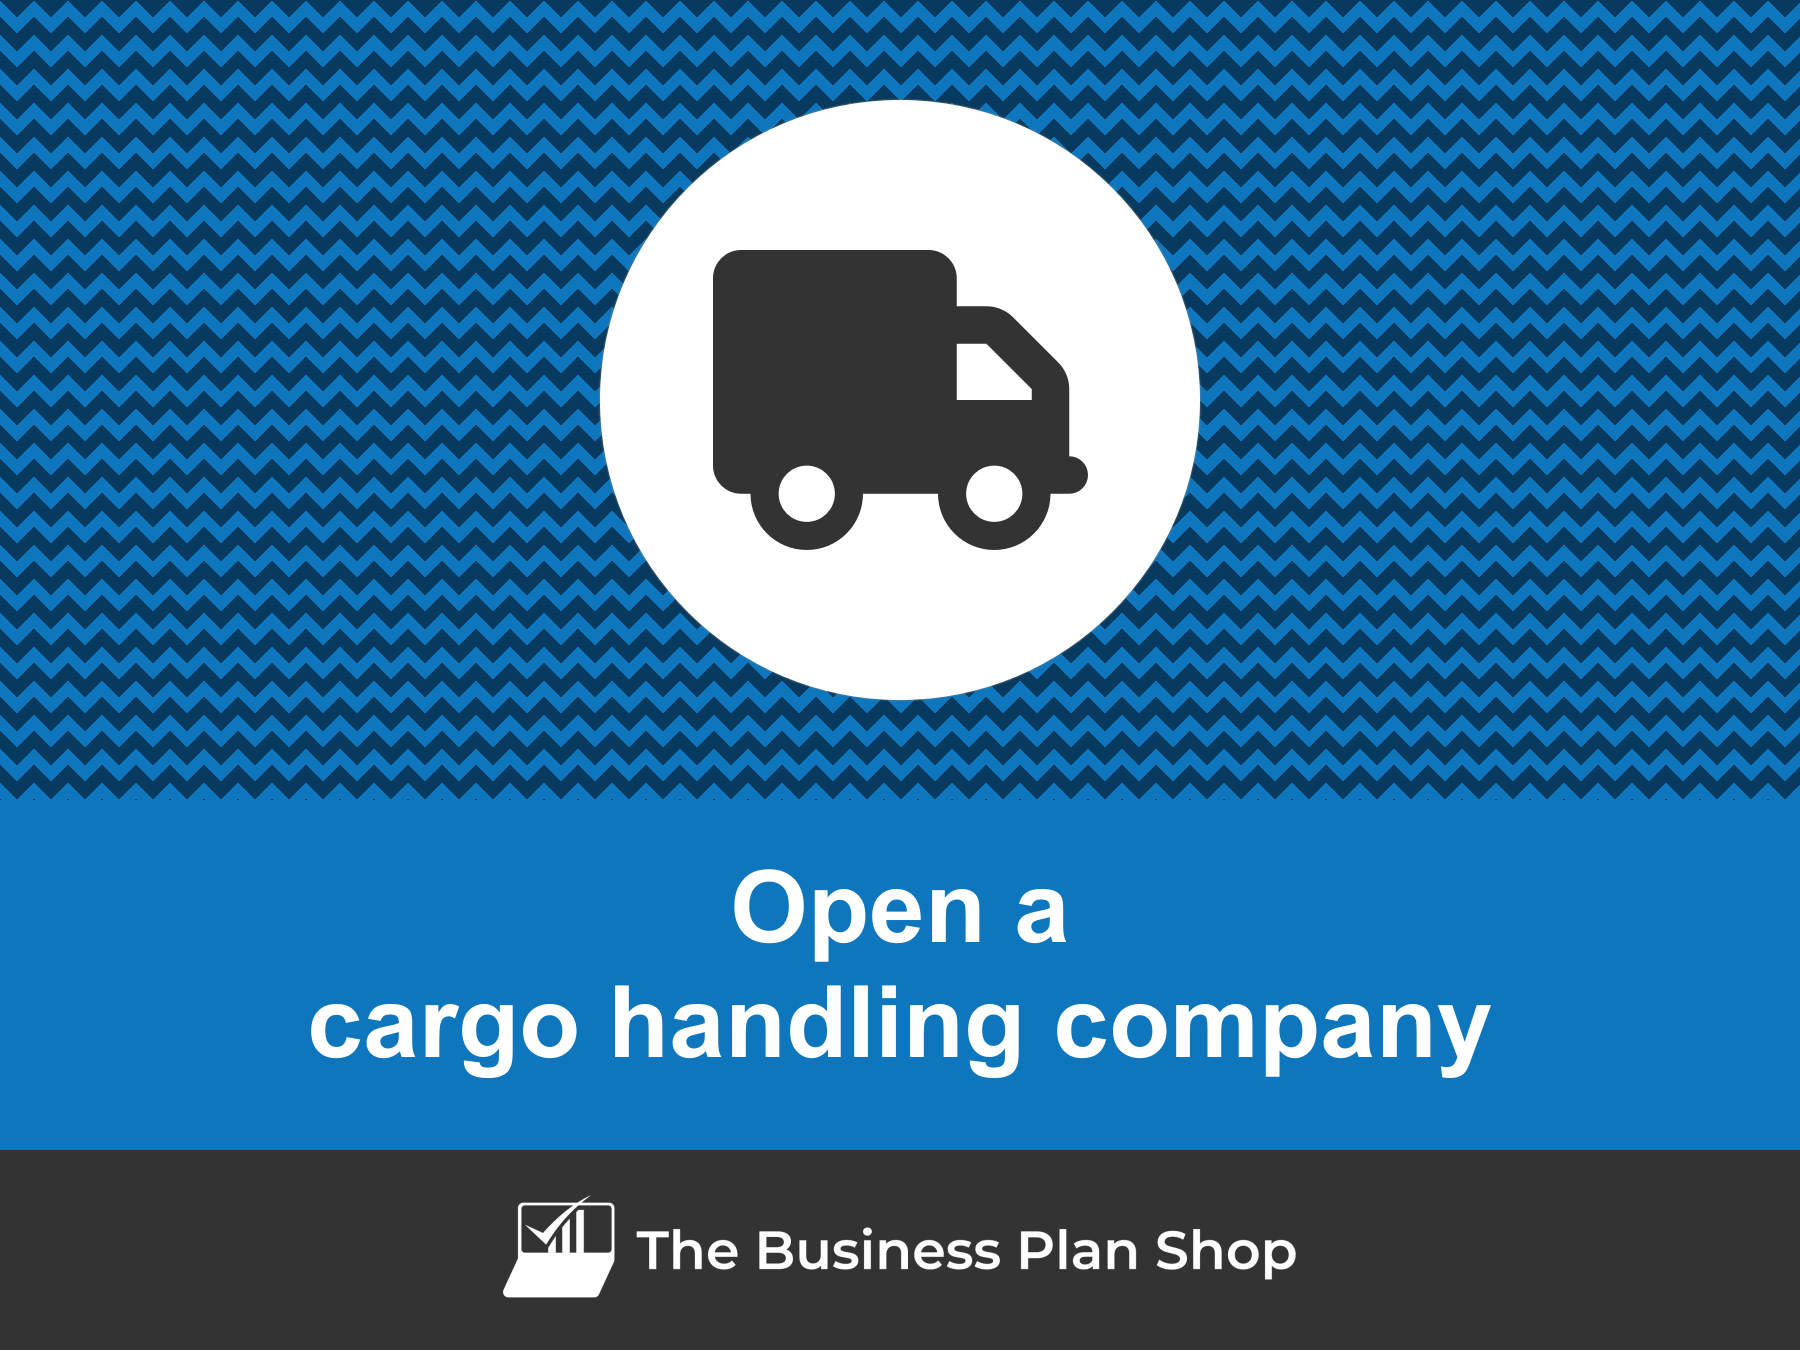 Putting the “Go” in Cargo: A Glimpse Behind the Design of the